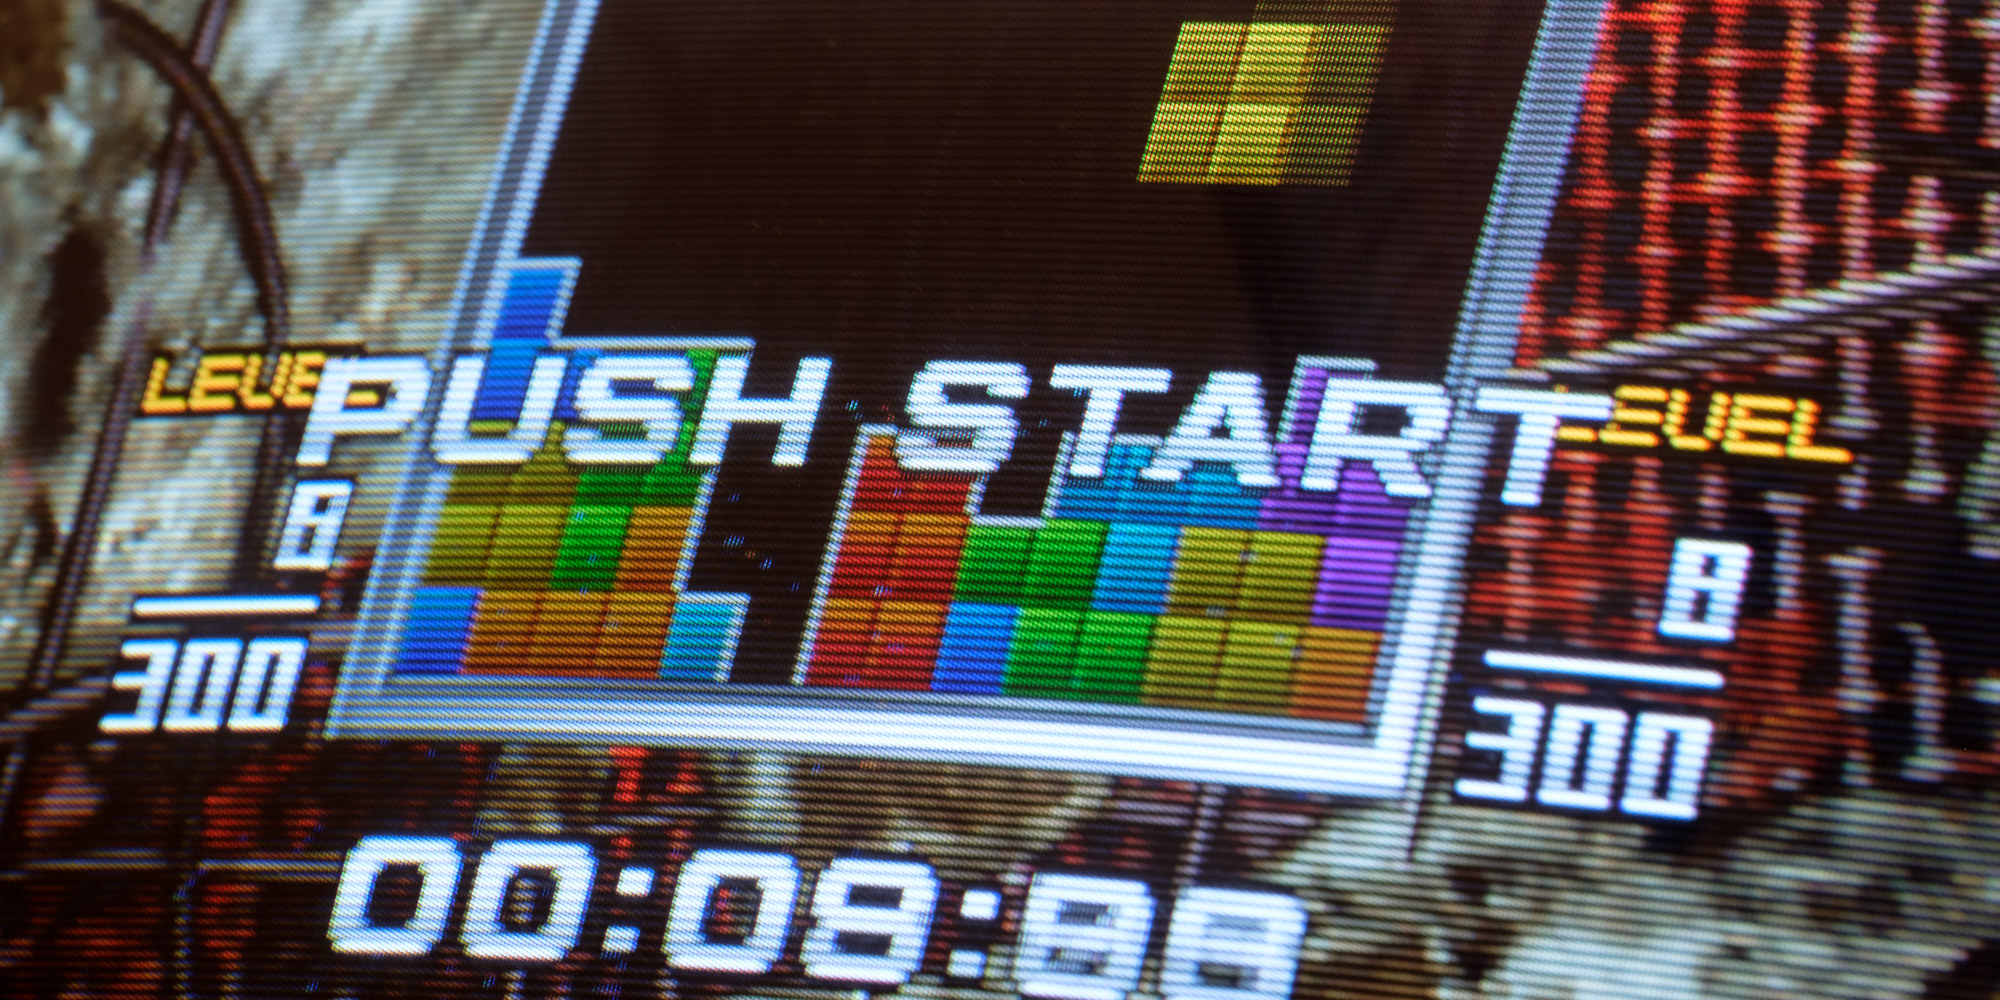 An very cropped in photo of a CRT arcade monitor showing the Tetris: The Absolute - The Grand Master 2 PLUS attract mode.